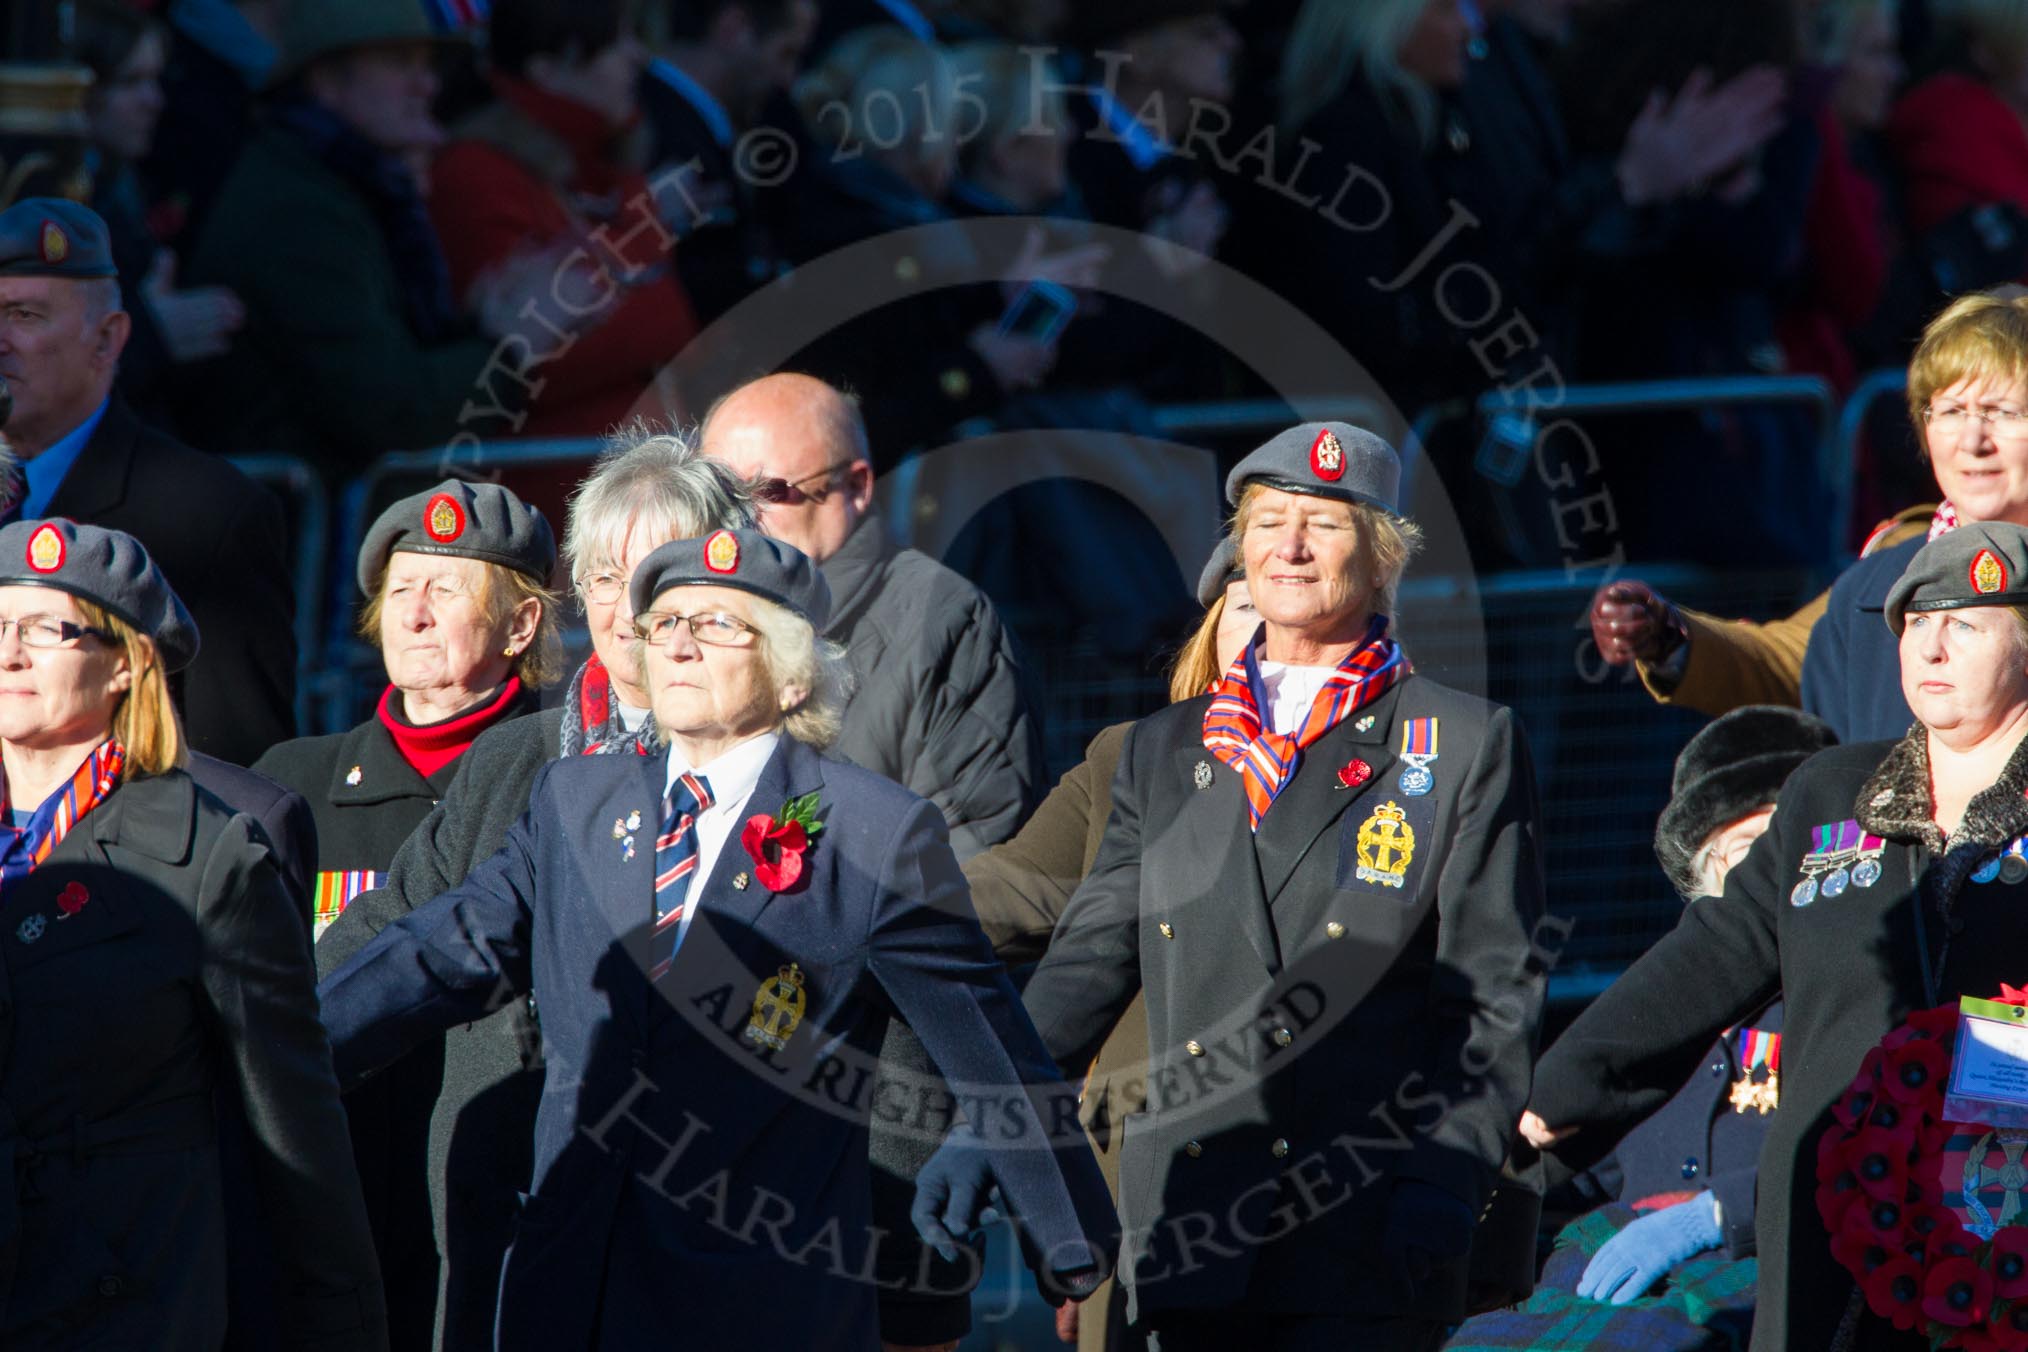 Remembrance Sunday Cenotaph March Past 2013: B39 - Queen Alexandra's Royal Army Nursing Corps Association..
Press stand opposite the Foreign Office building, Whitehall, London SW1,
London,
Greater London,
United Kingdom,
on 10 November 2013 at 12:04, image #1642